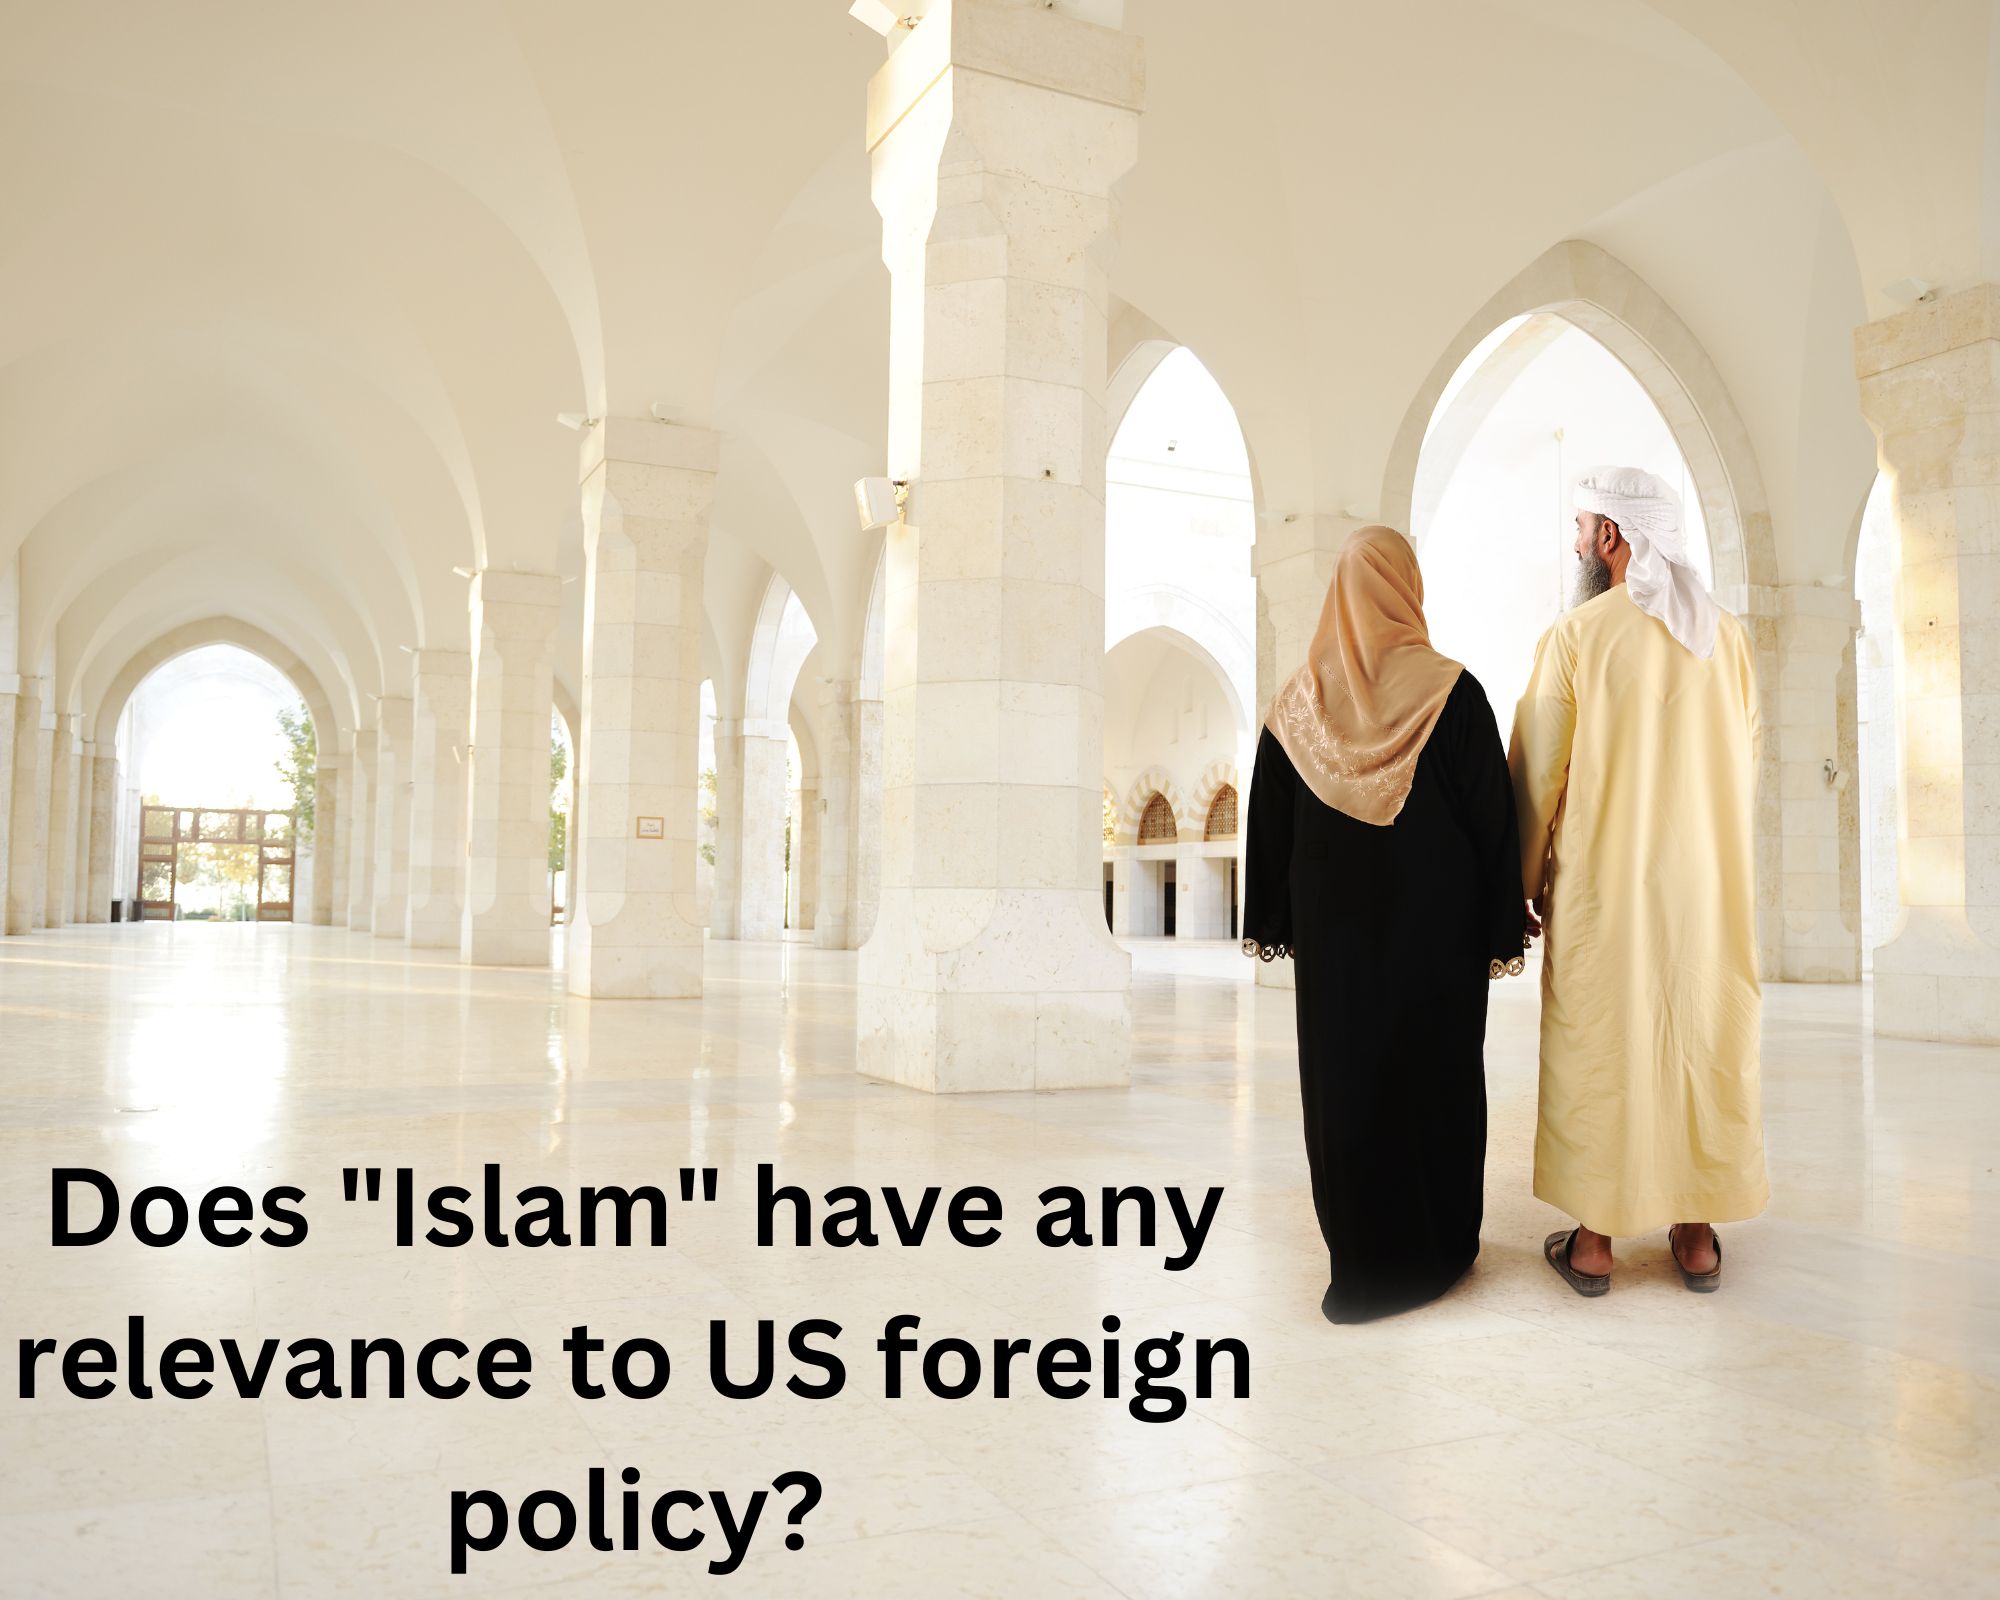 Does "Islam" have any relevance to US foreign policy?